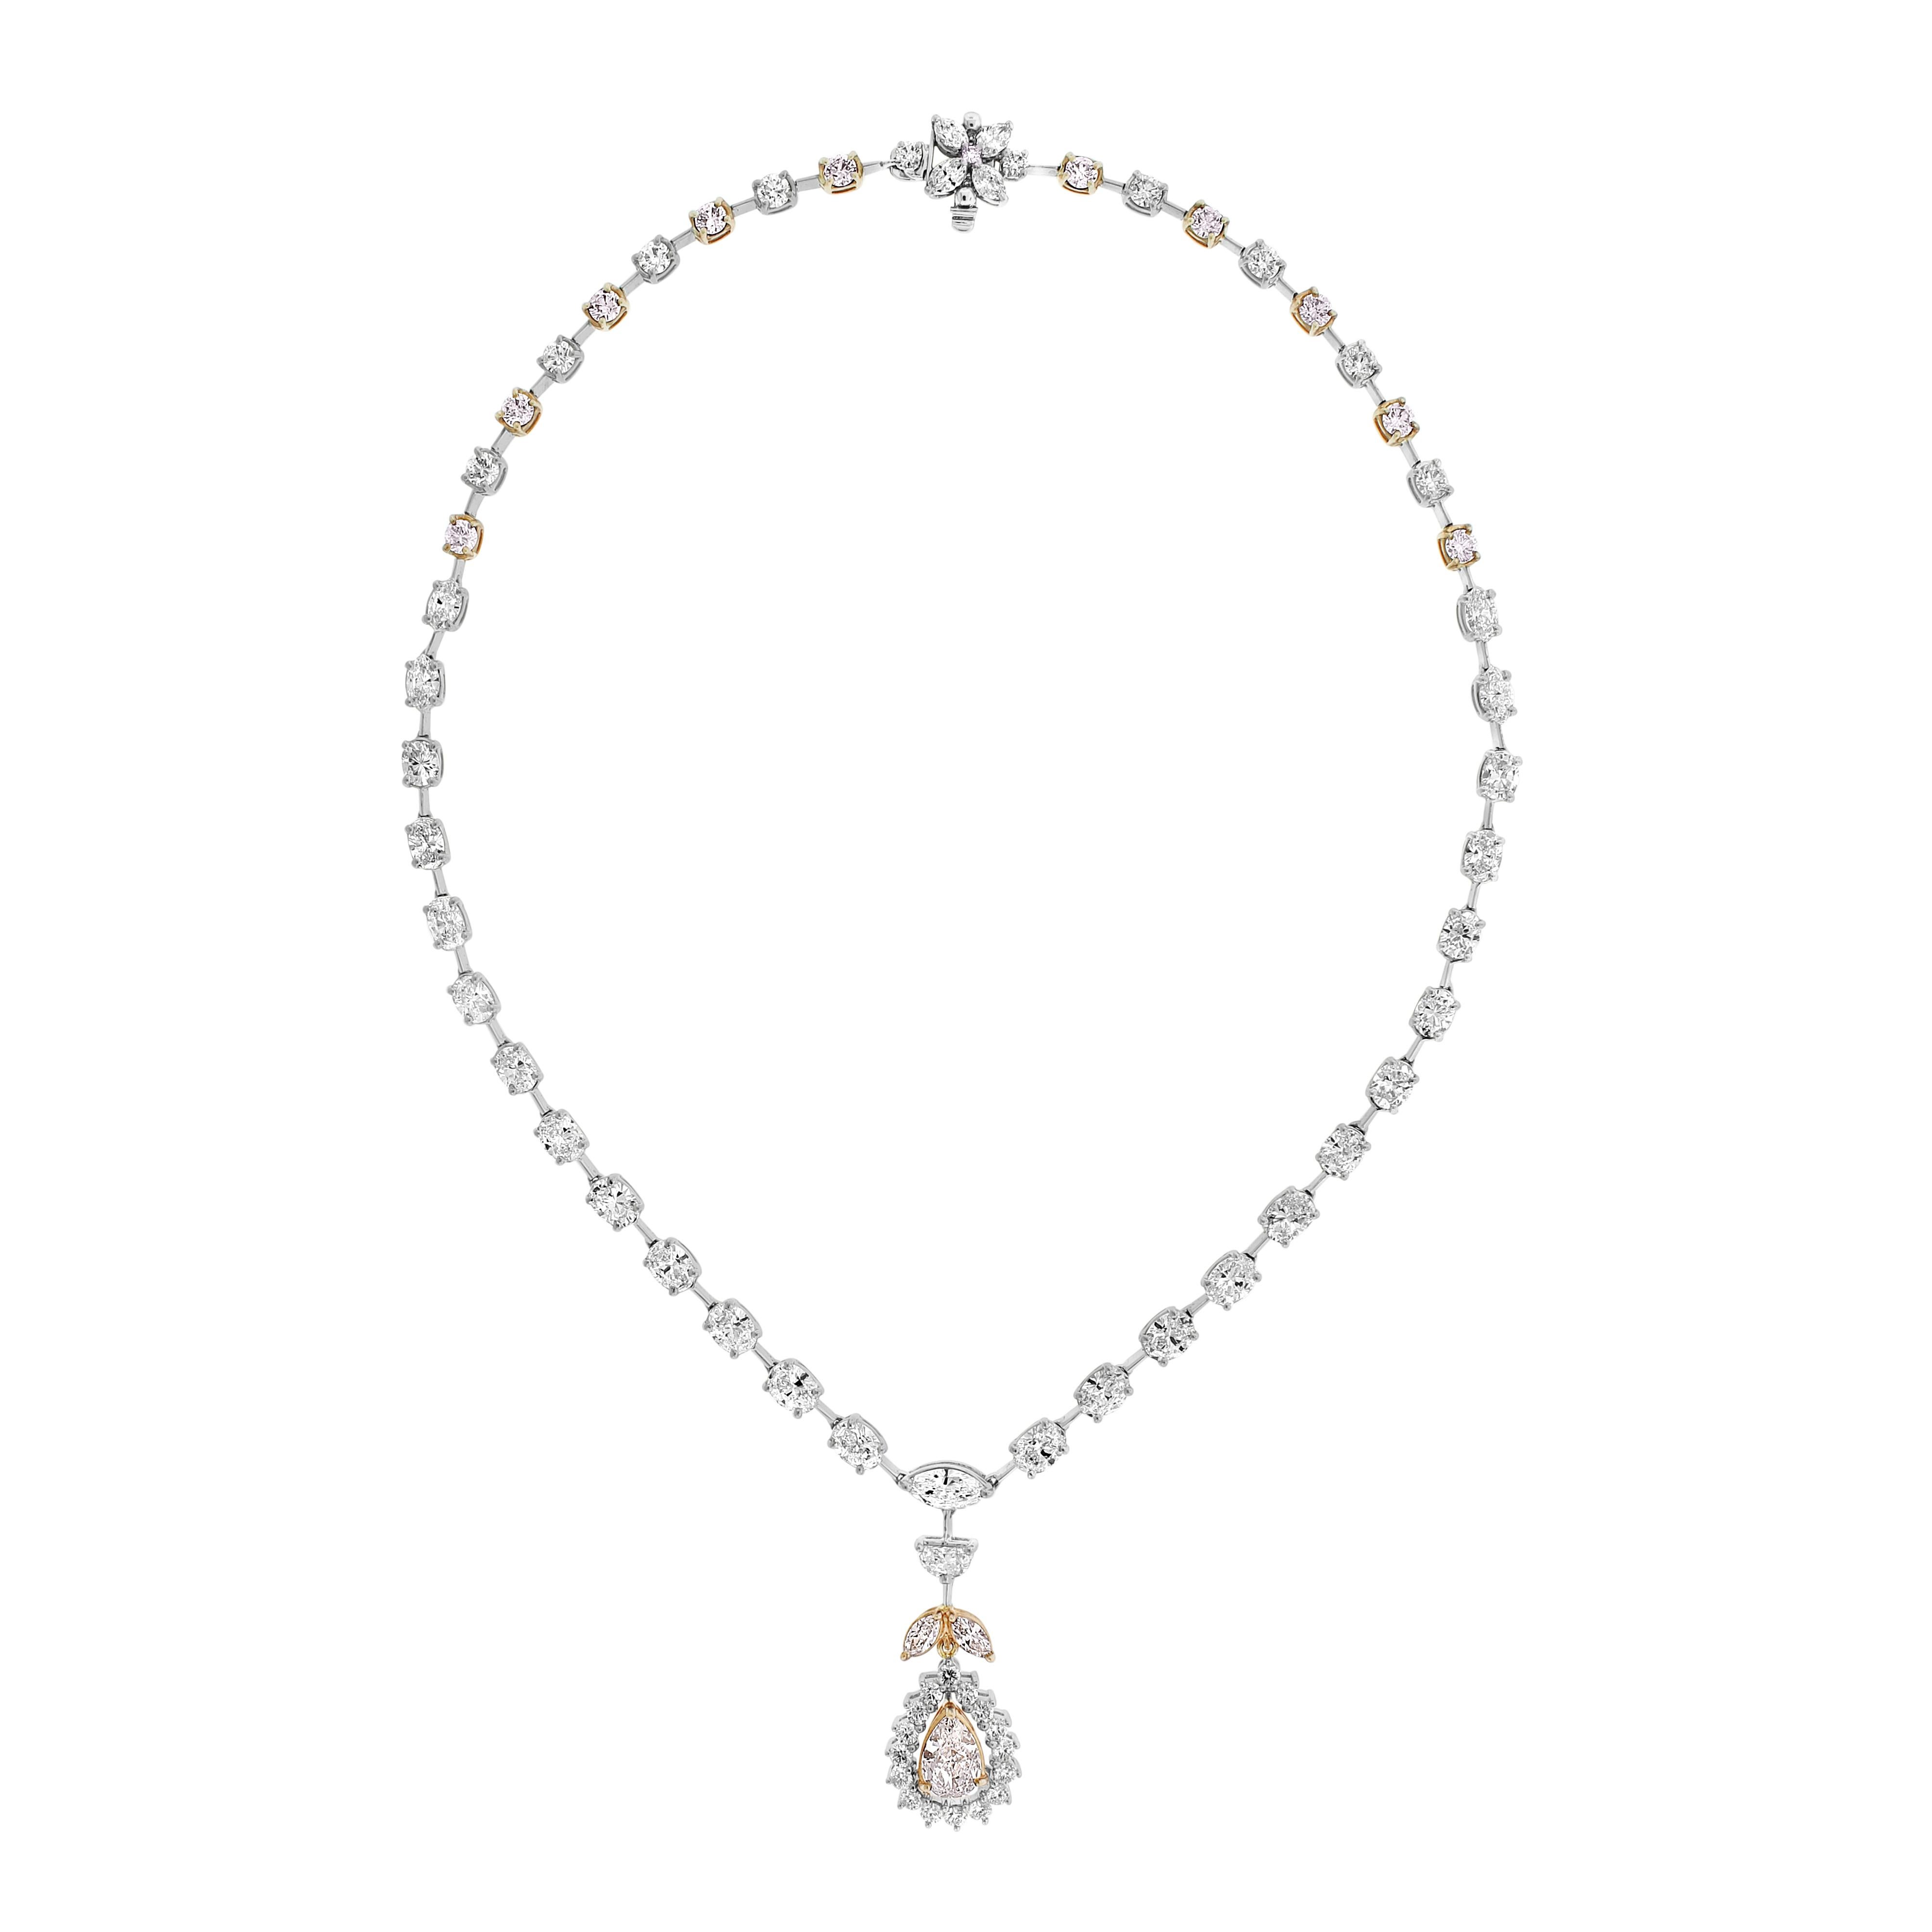 Women's Beauvince Maira Diamond Necklace '19.26 ct Diamonds' in Gold For Sale